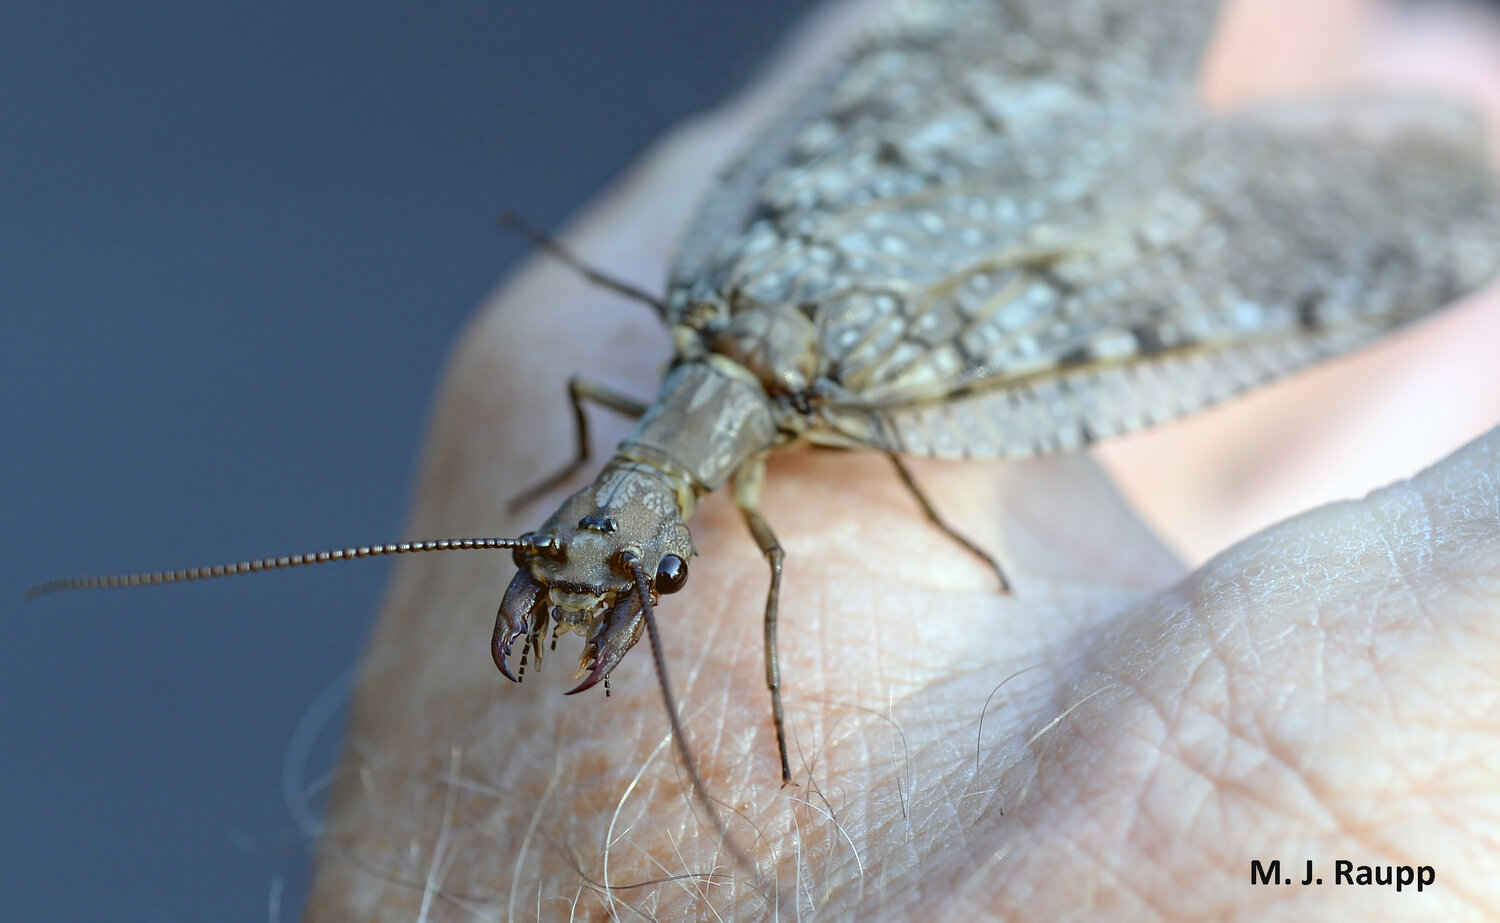 How a cool creepy insect warms up: Eastern Dobsonfly, Corydalus